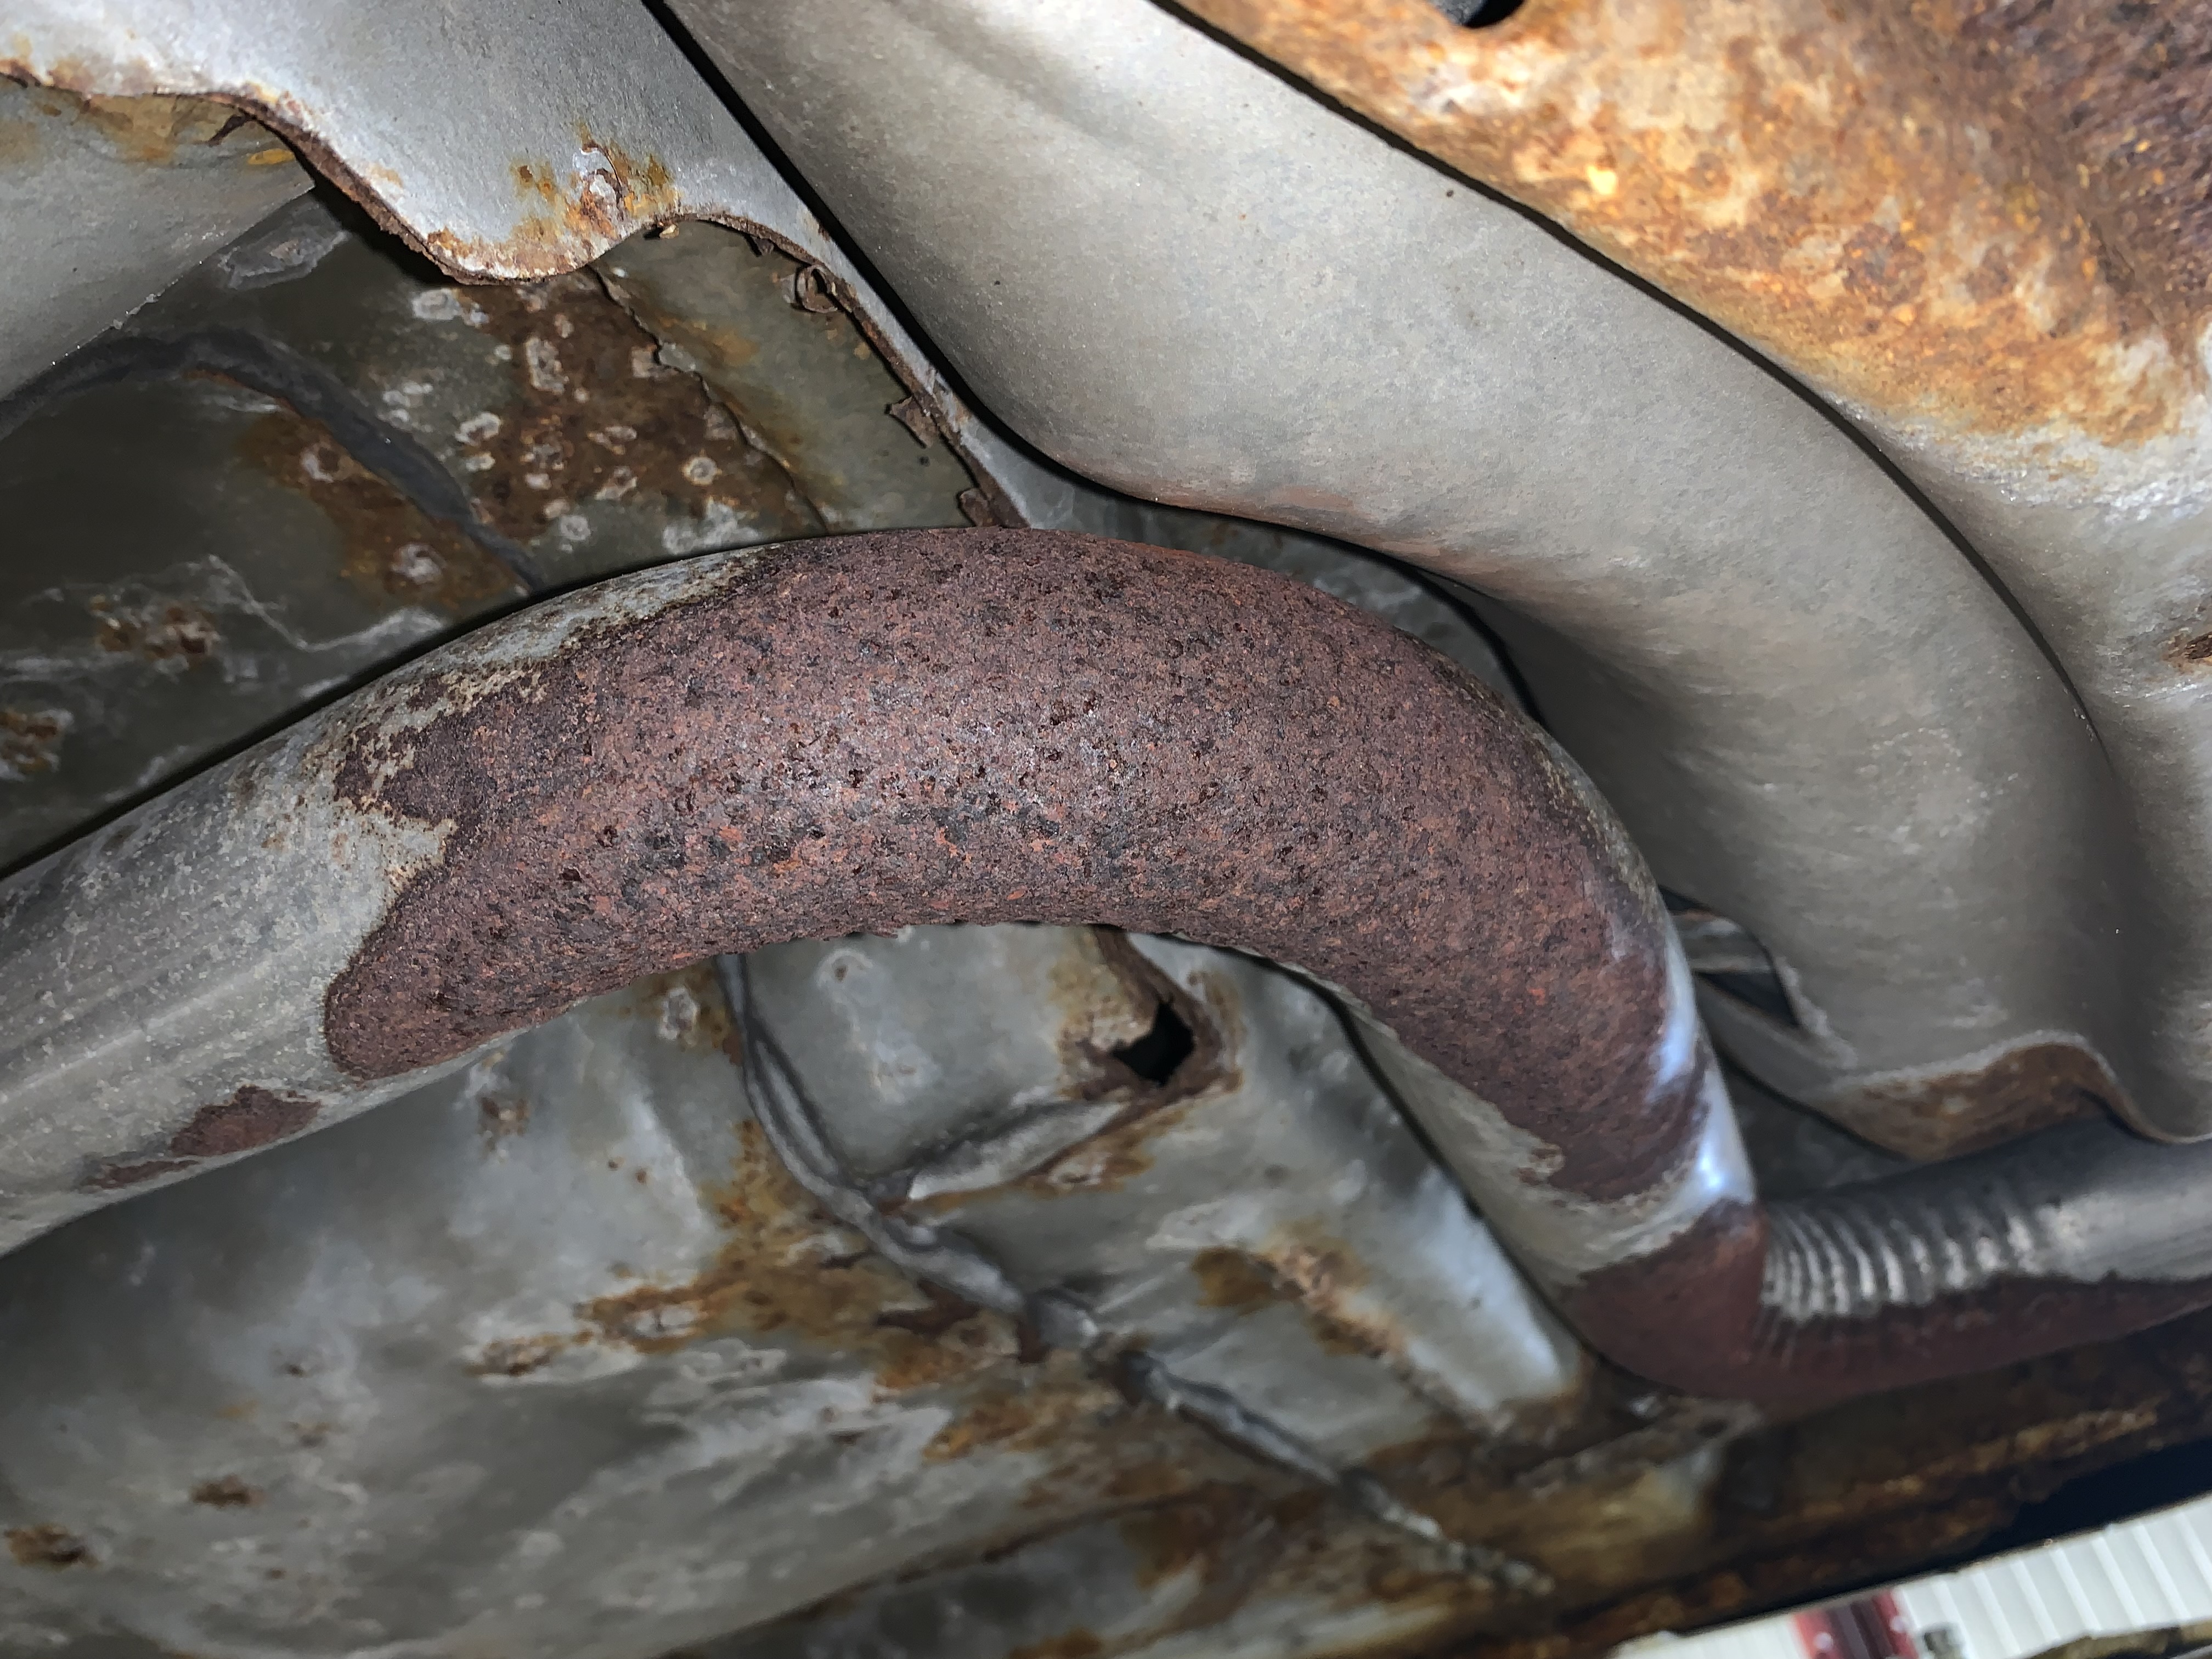 https://www.louscarcare.com/Files/Blog/images/Rusted%20Exhaust%20Pipe%20Lou's%20Car%20Care%20Baldwinsville%20NY%2013027.JPG